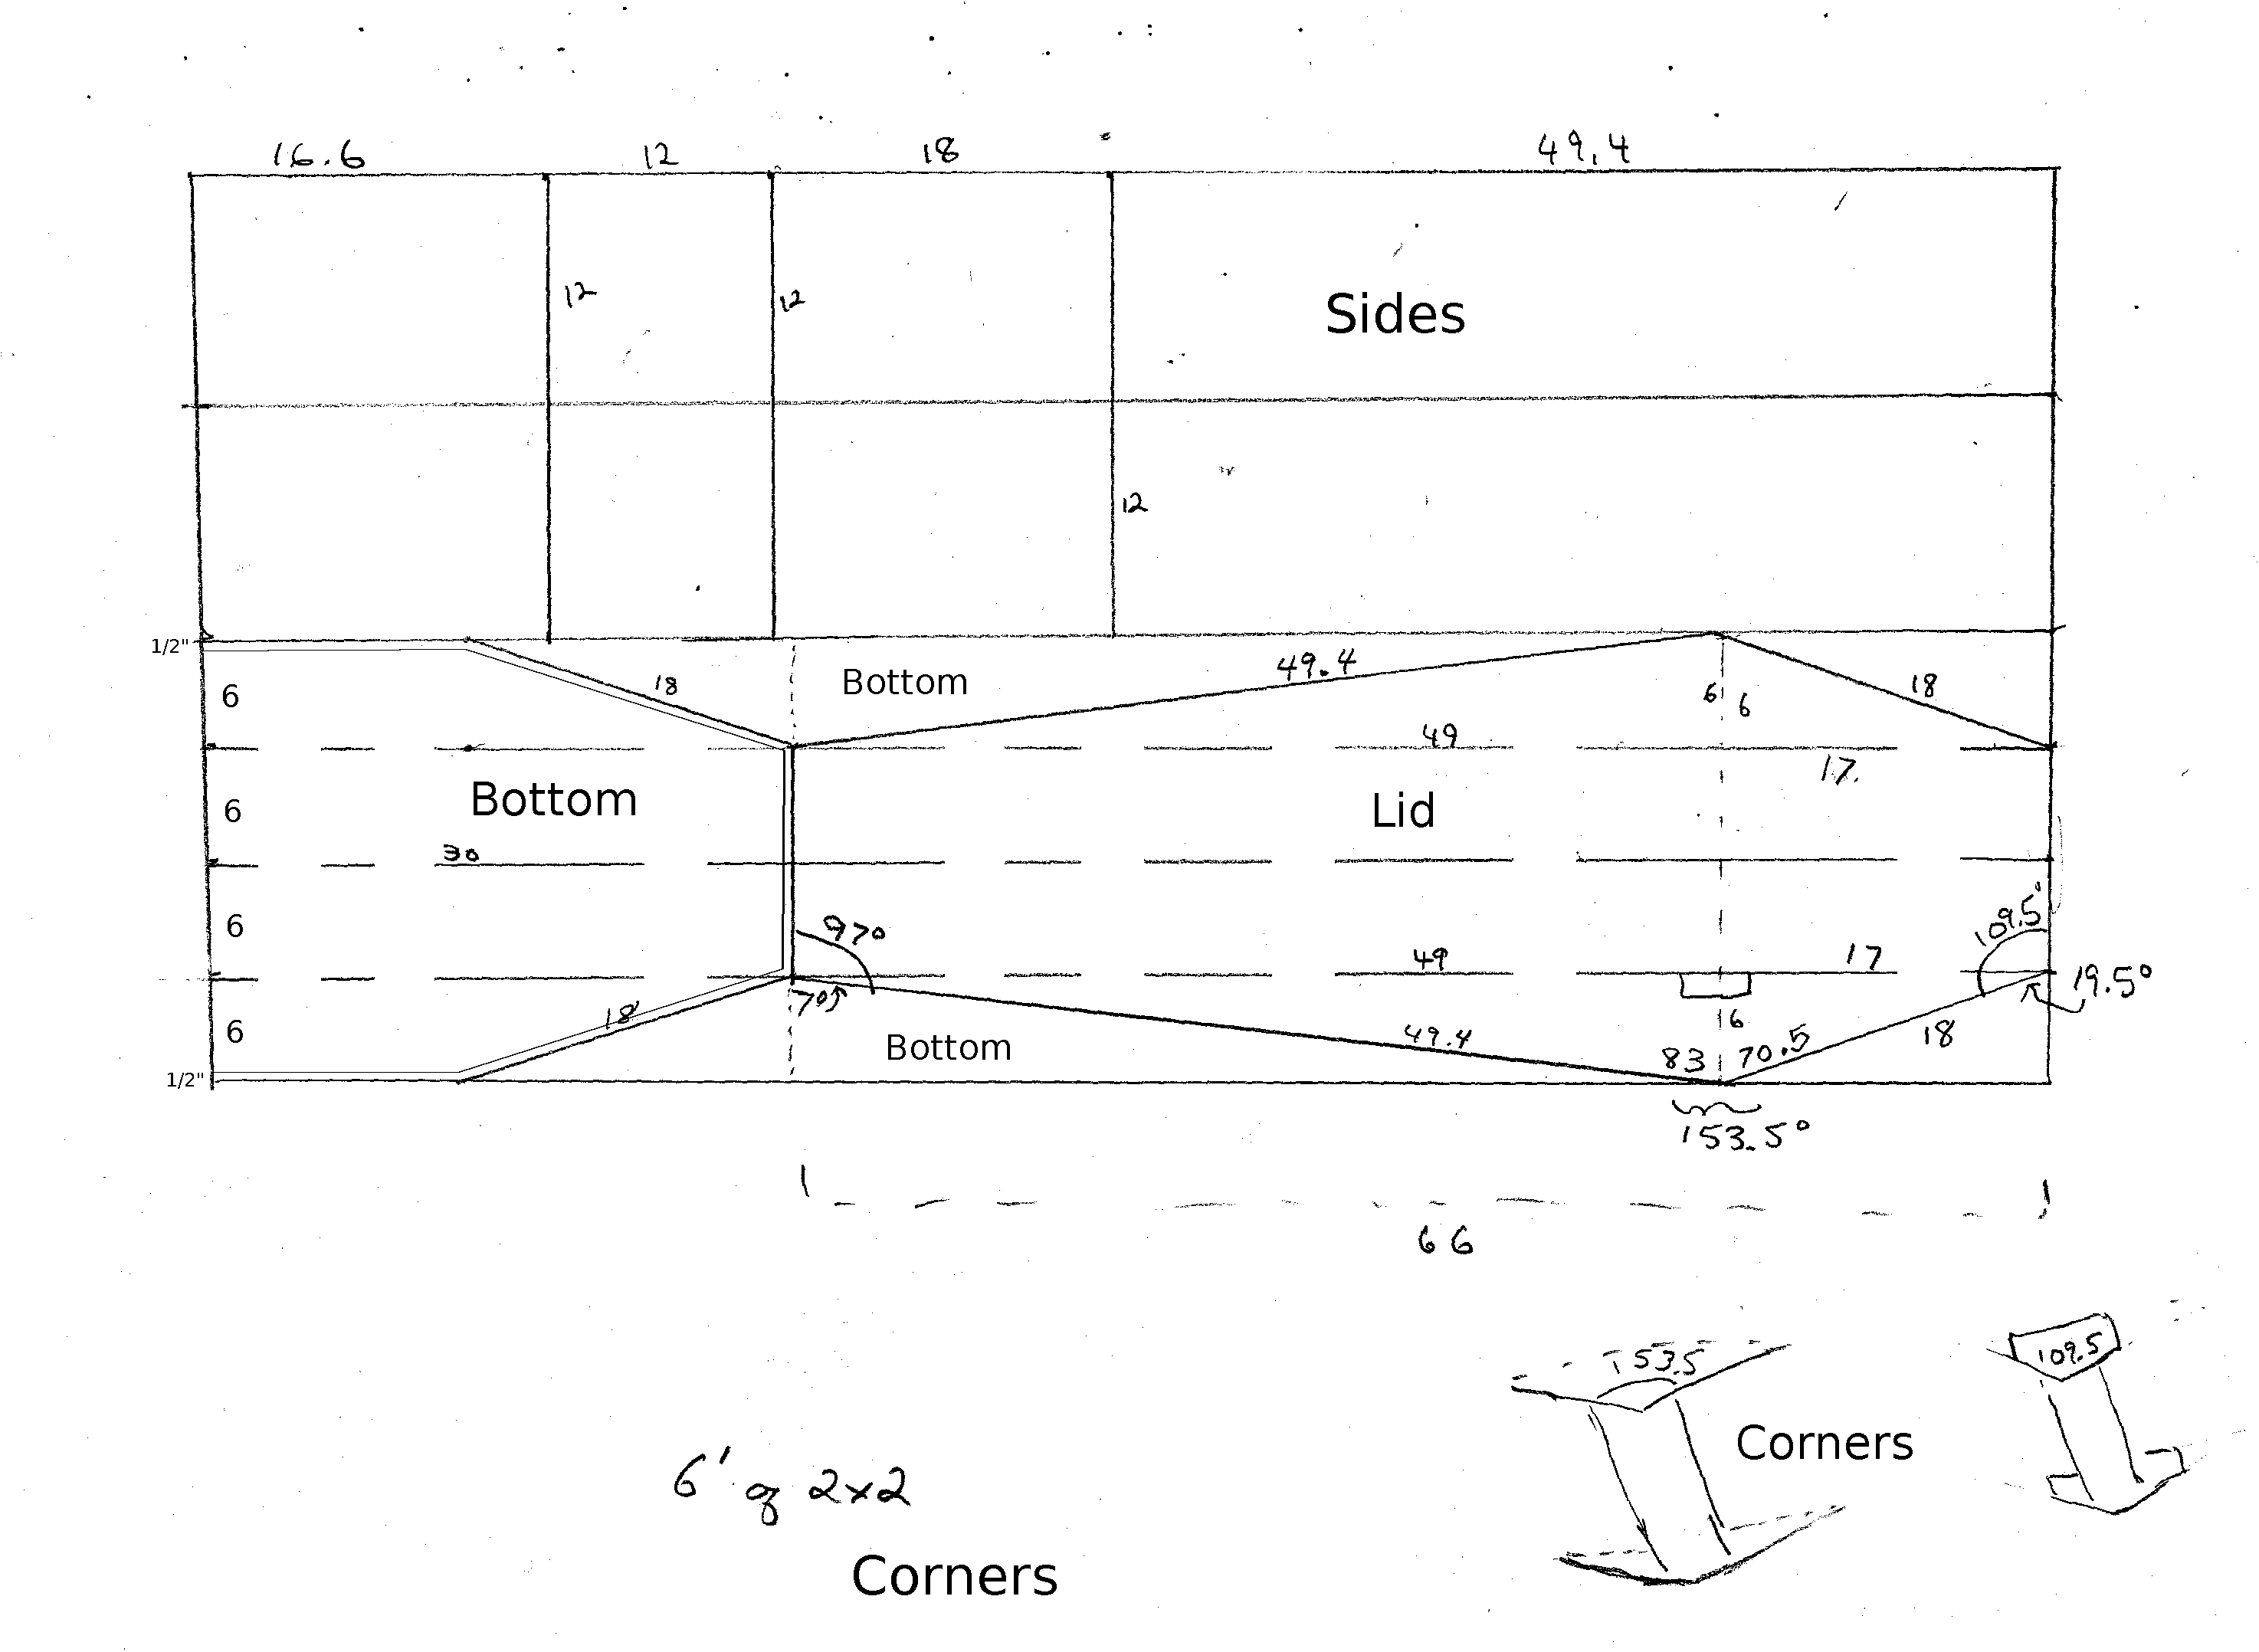 Initial Plywood Cut Diagram.with_labels.04.png